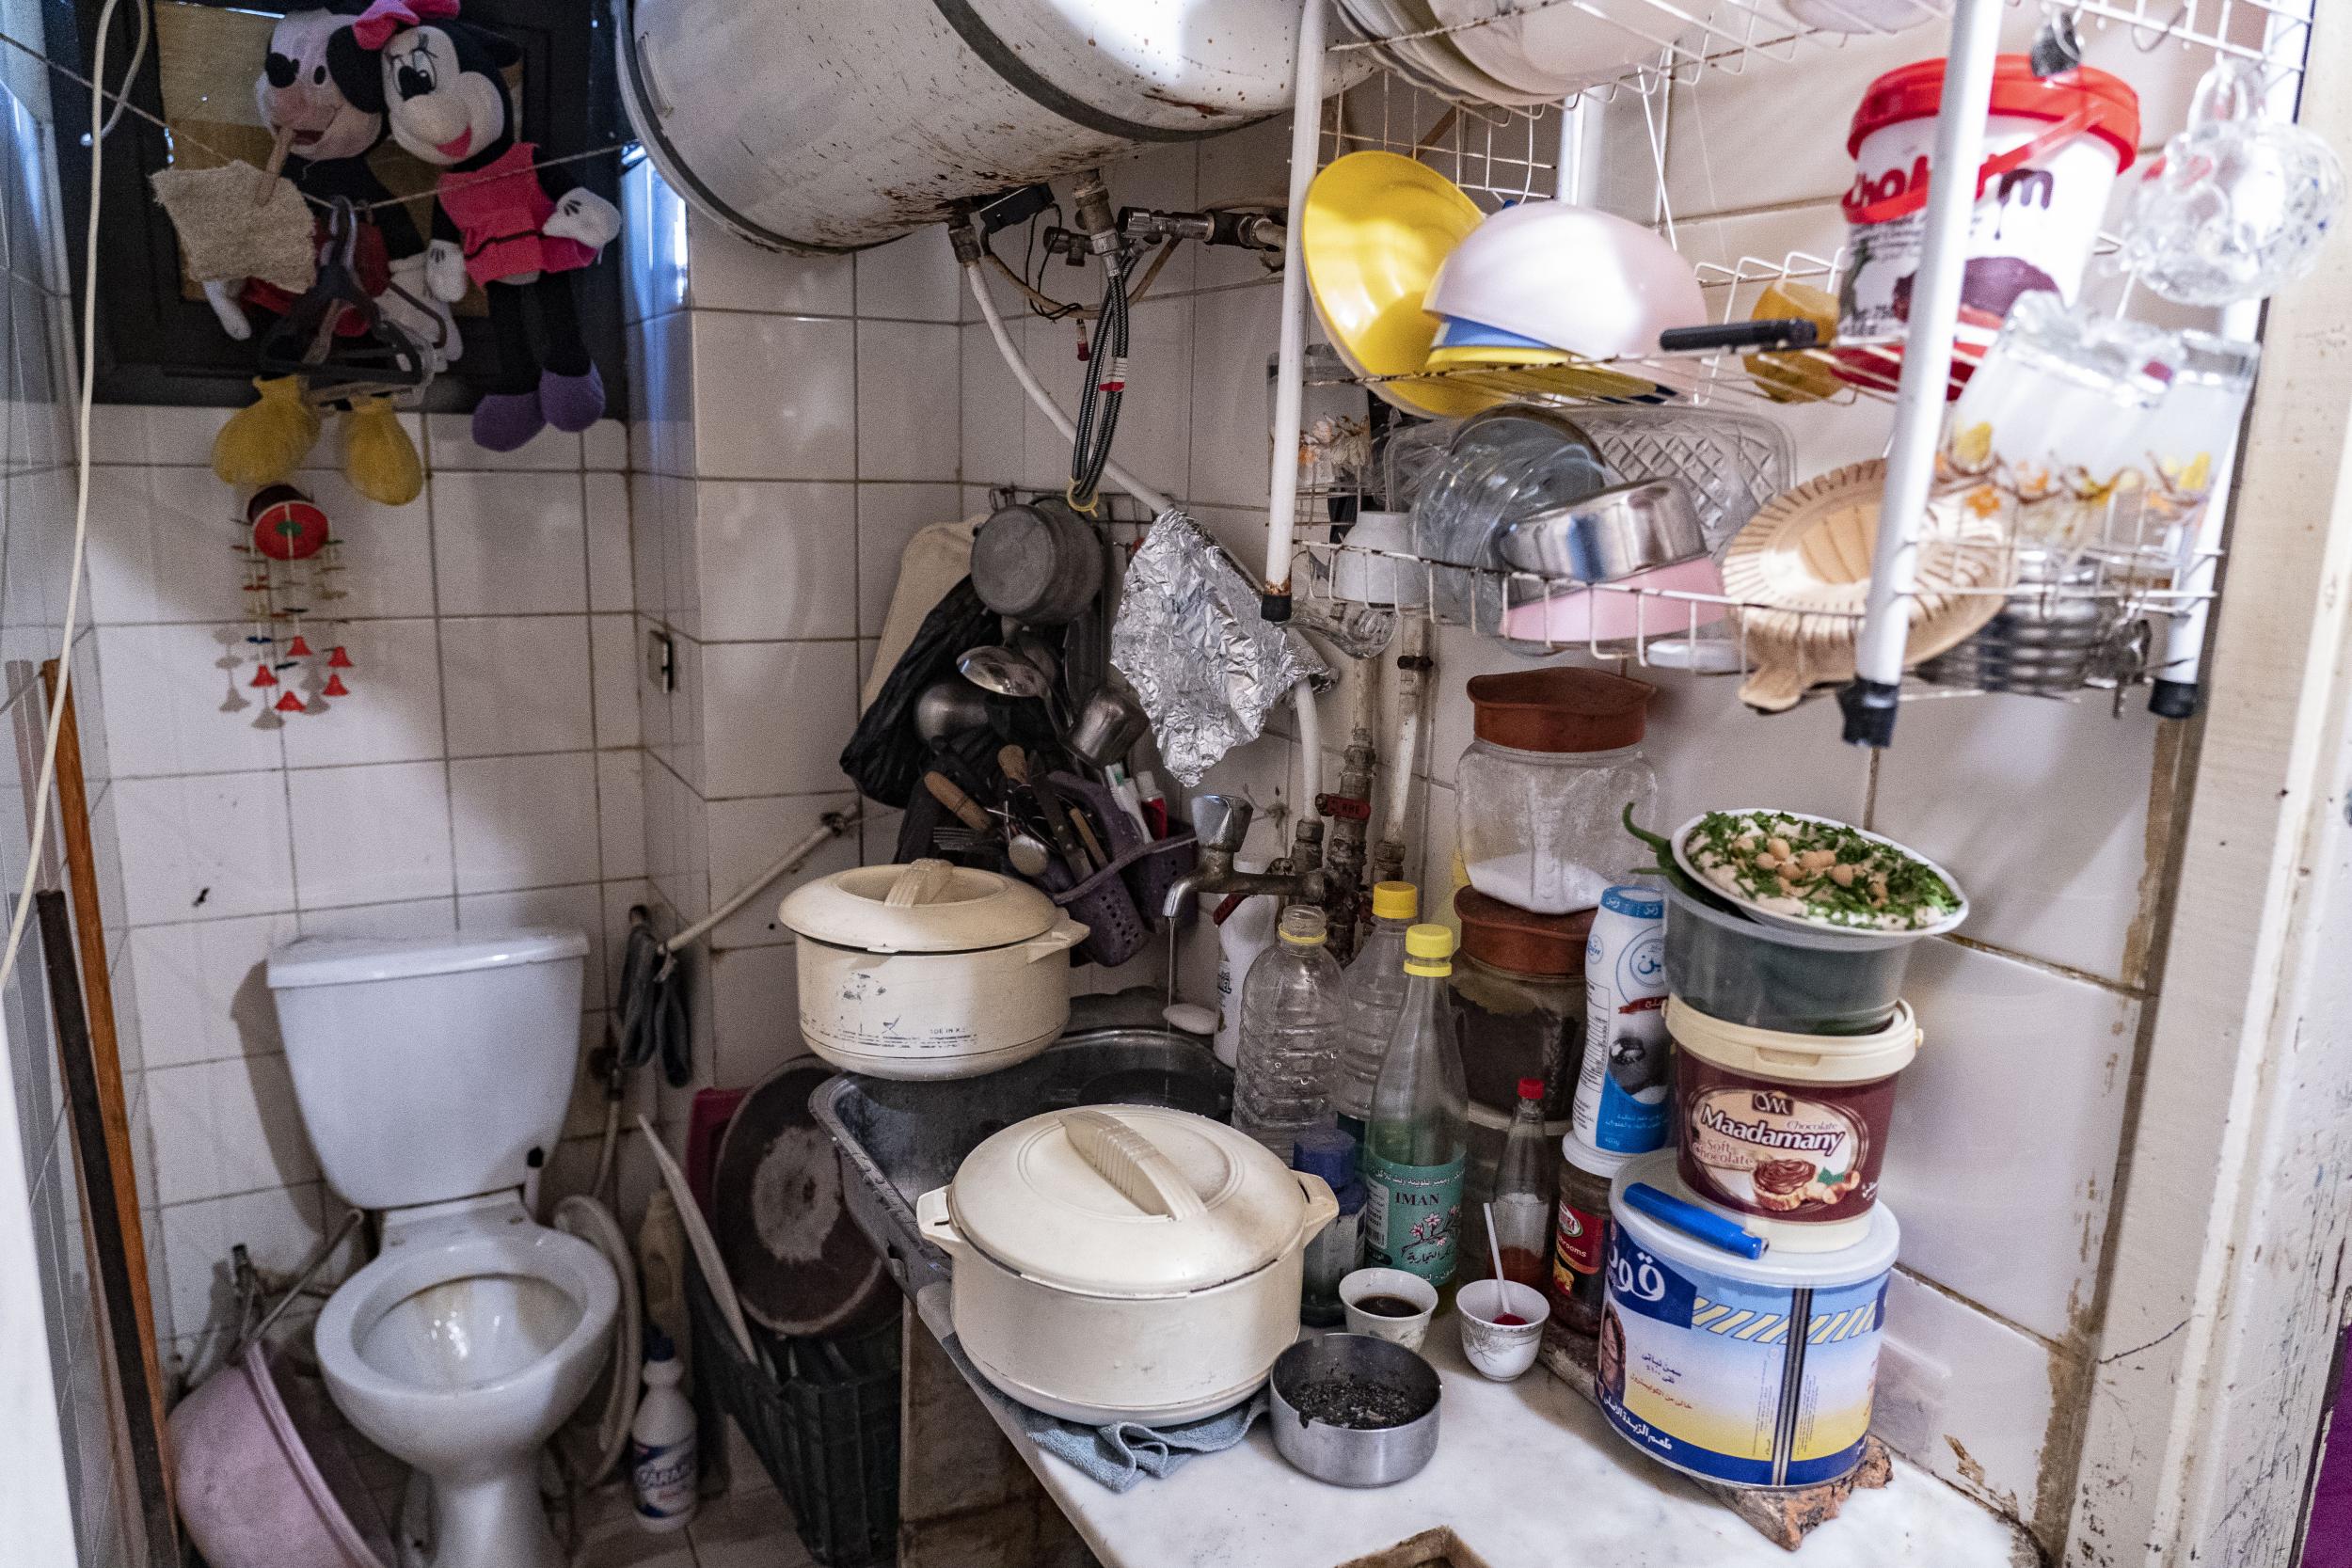 Intisar Abdel-Salem’s kitchen which is located in the bathroom, just one of two rooms where she and her four children live